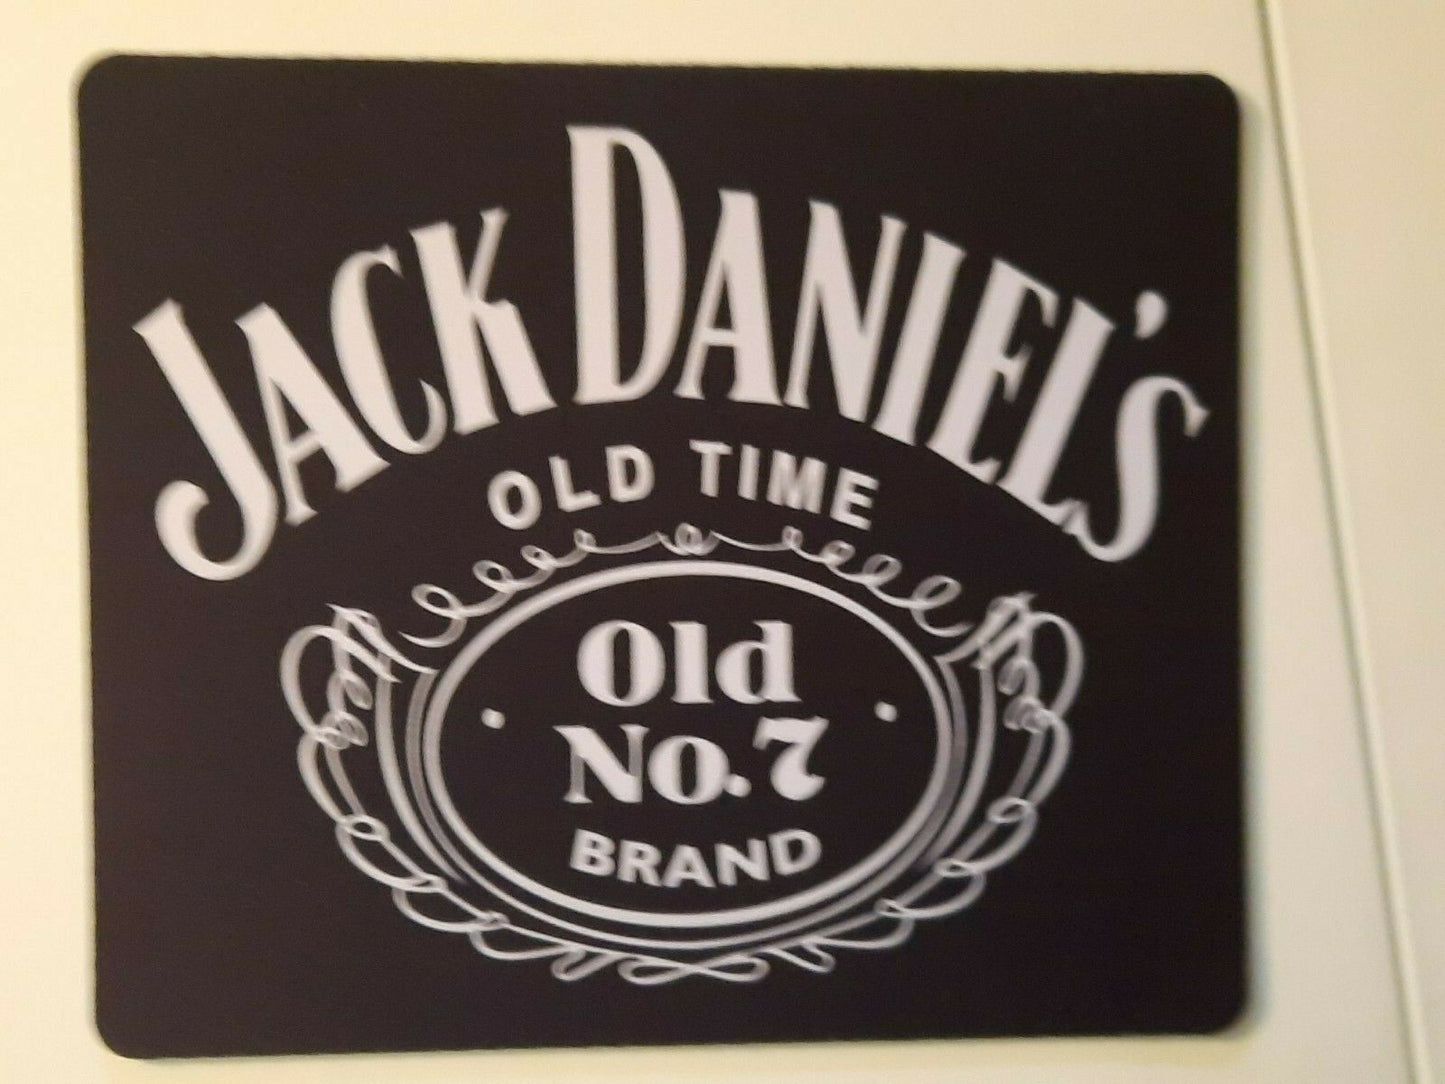 Jack Daniels Old No 7 Brand Mouse Pad Alcohol Liquor Whisky Whiskey